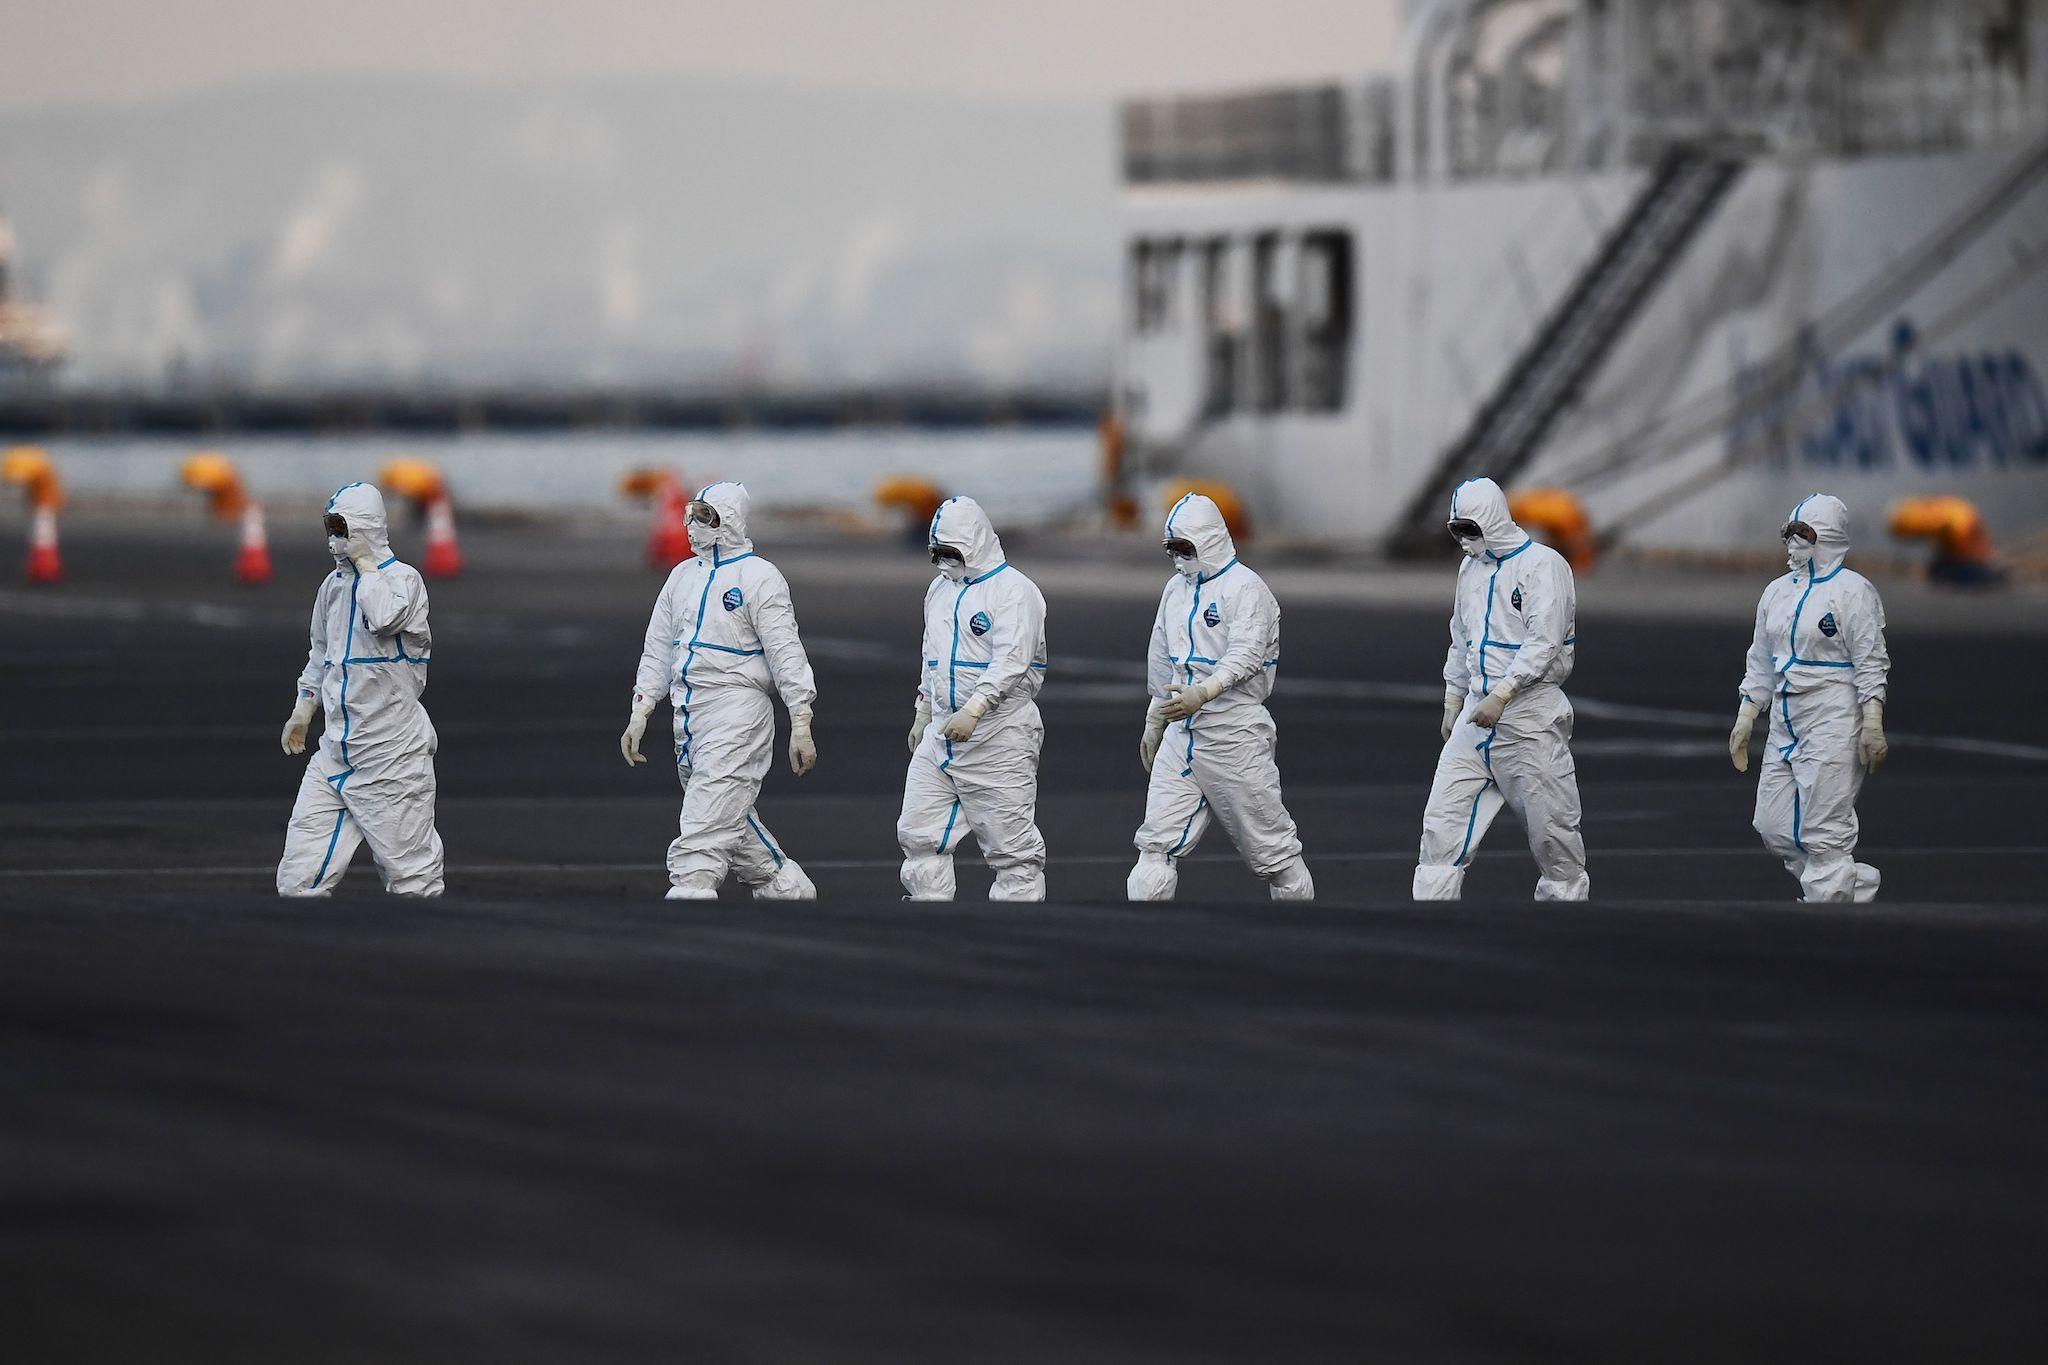 People wearing protective suits walk from the Diamond Princess cruise ship, with around 3,600 people quarantined onboard due to fears of the new coronavirus, at the Daikoku Pier Cruise Terminal in Yokohama port on February 10, 2020